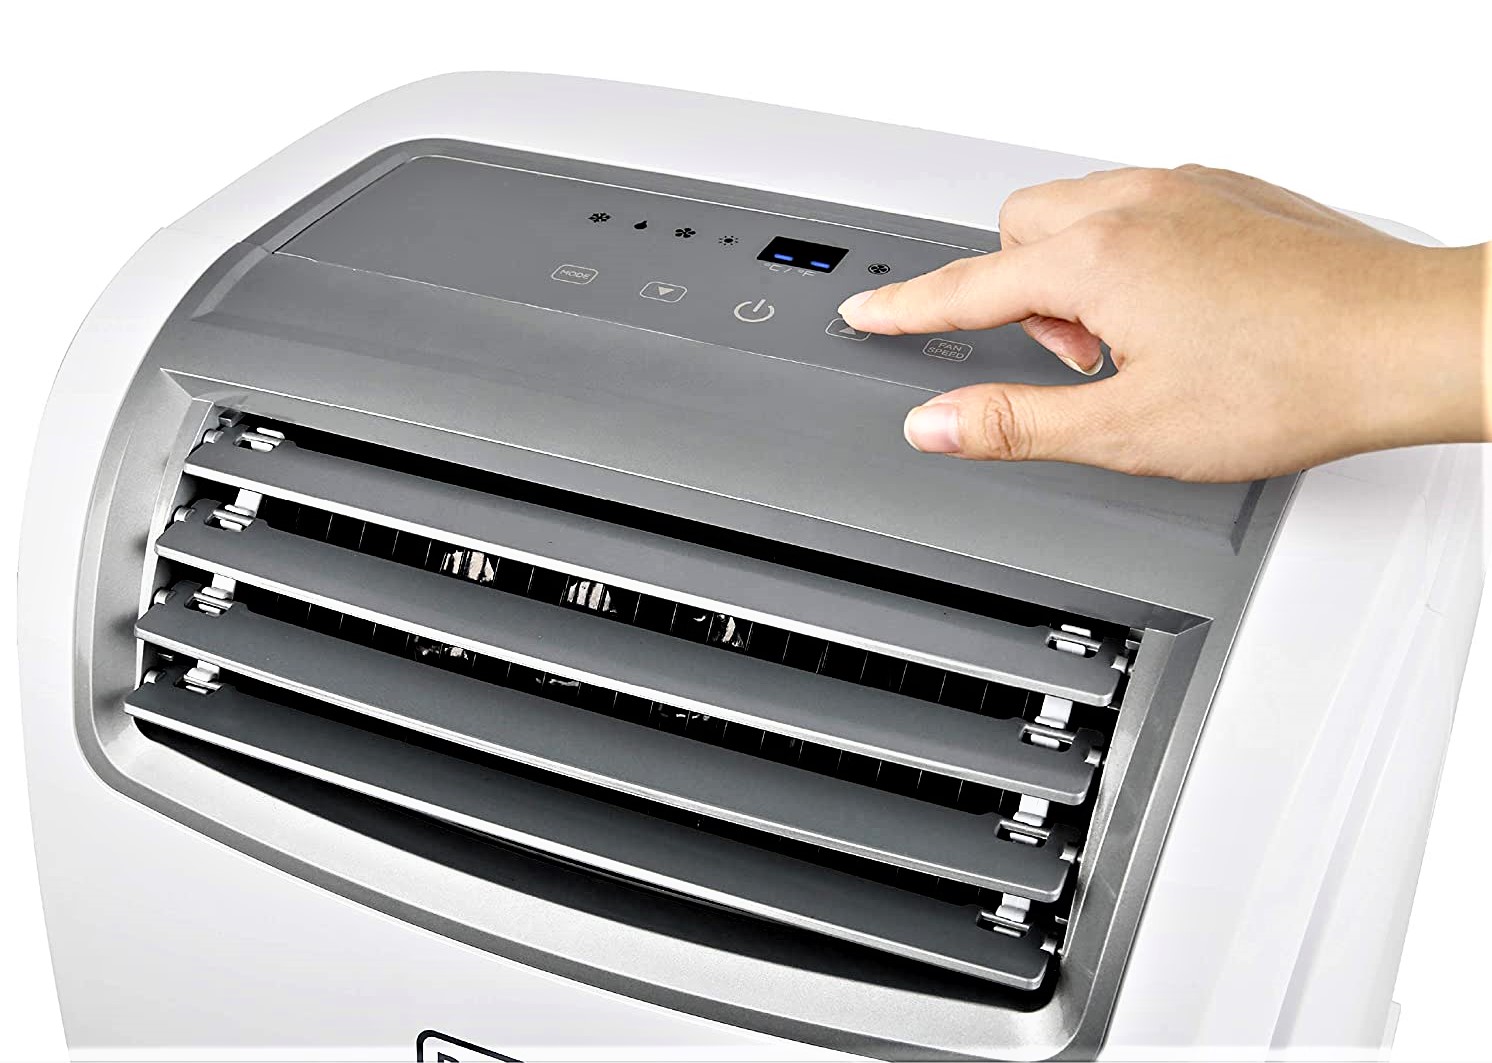 10 Best Air Conditioners for Your Hot Garage 2022 Review: Portable/ Split AC List Fits for Higher Temperature All In One Cooling Gear Lab: Any Refrigerators Air Conditioners Freezers Ice Makers Coolers Fans Reviewed And Compared.